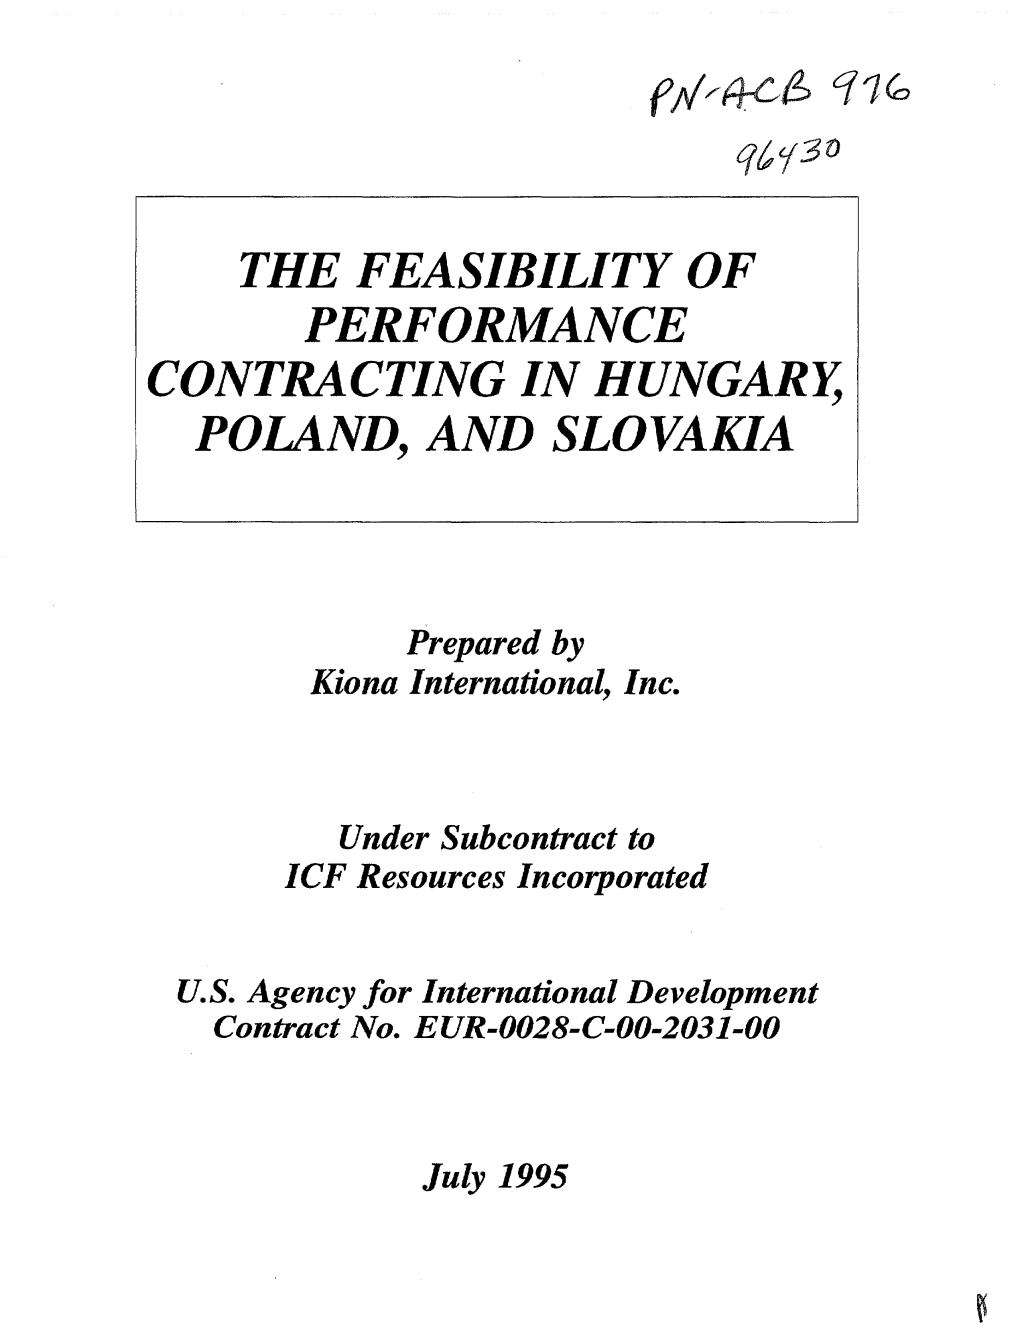 The Feasibility of Performance Contracting in Hungary, Poland, and Slovakza